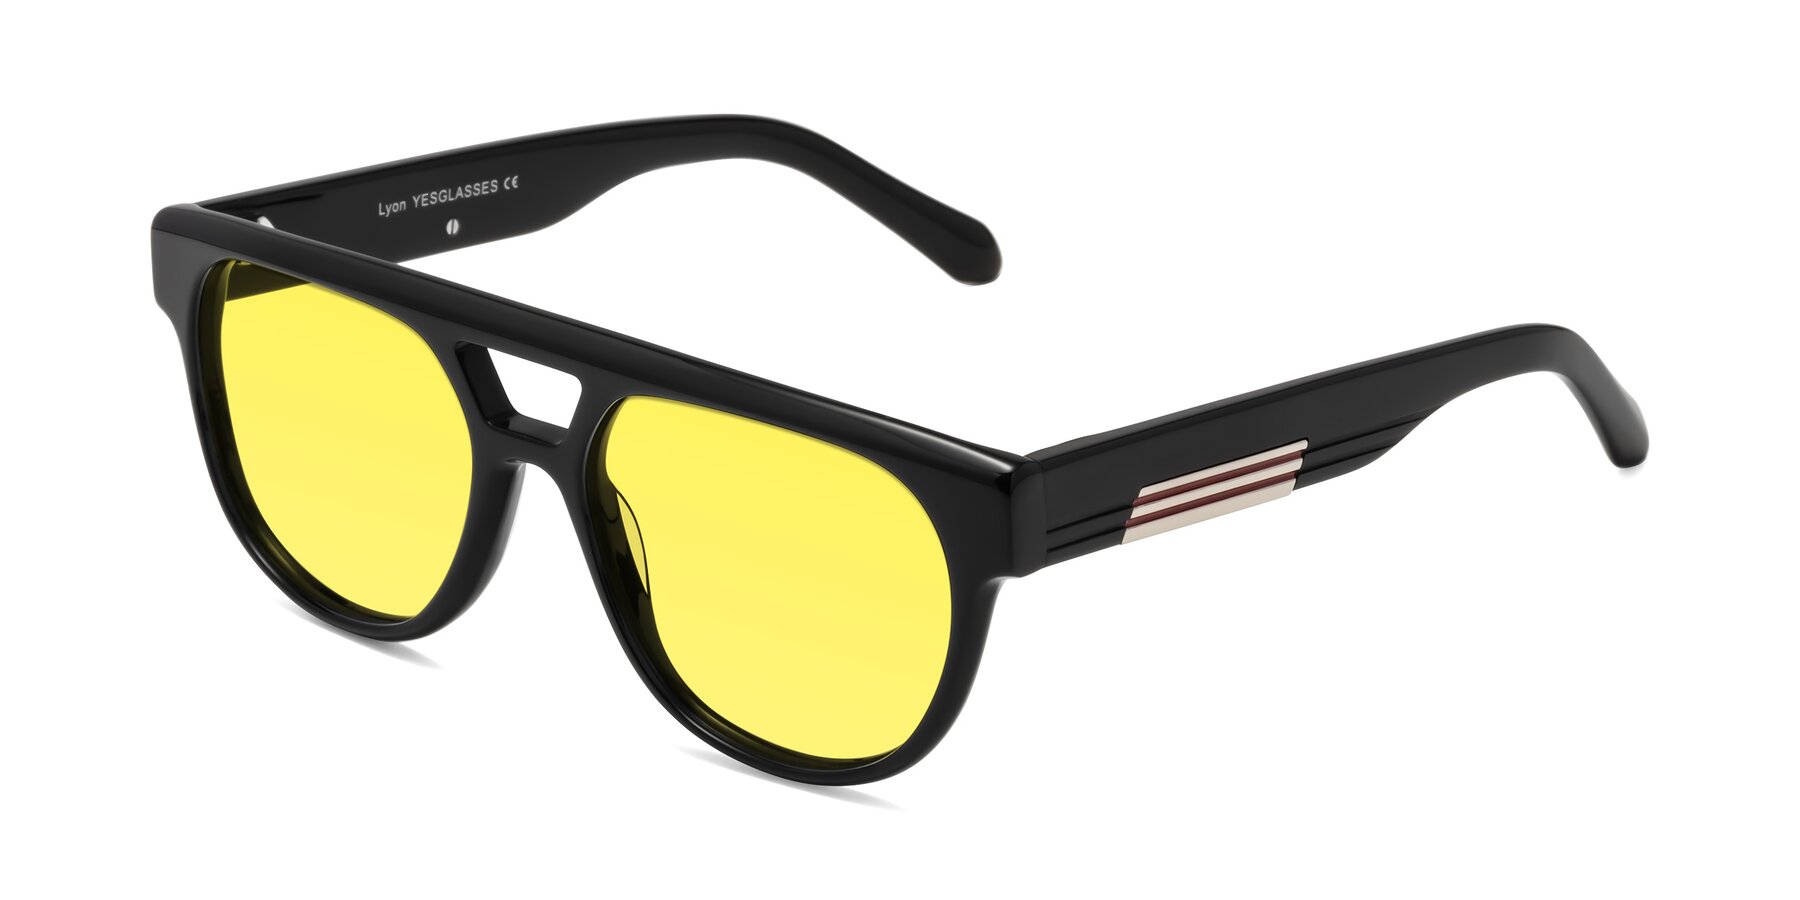 Angle of Lyon in Black with Medium Yellow Tinted Lenses